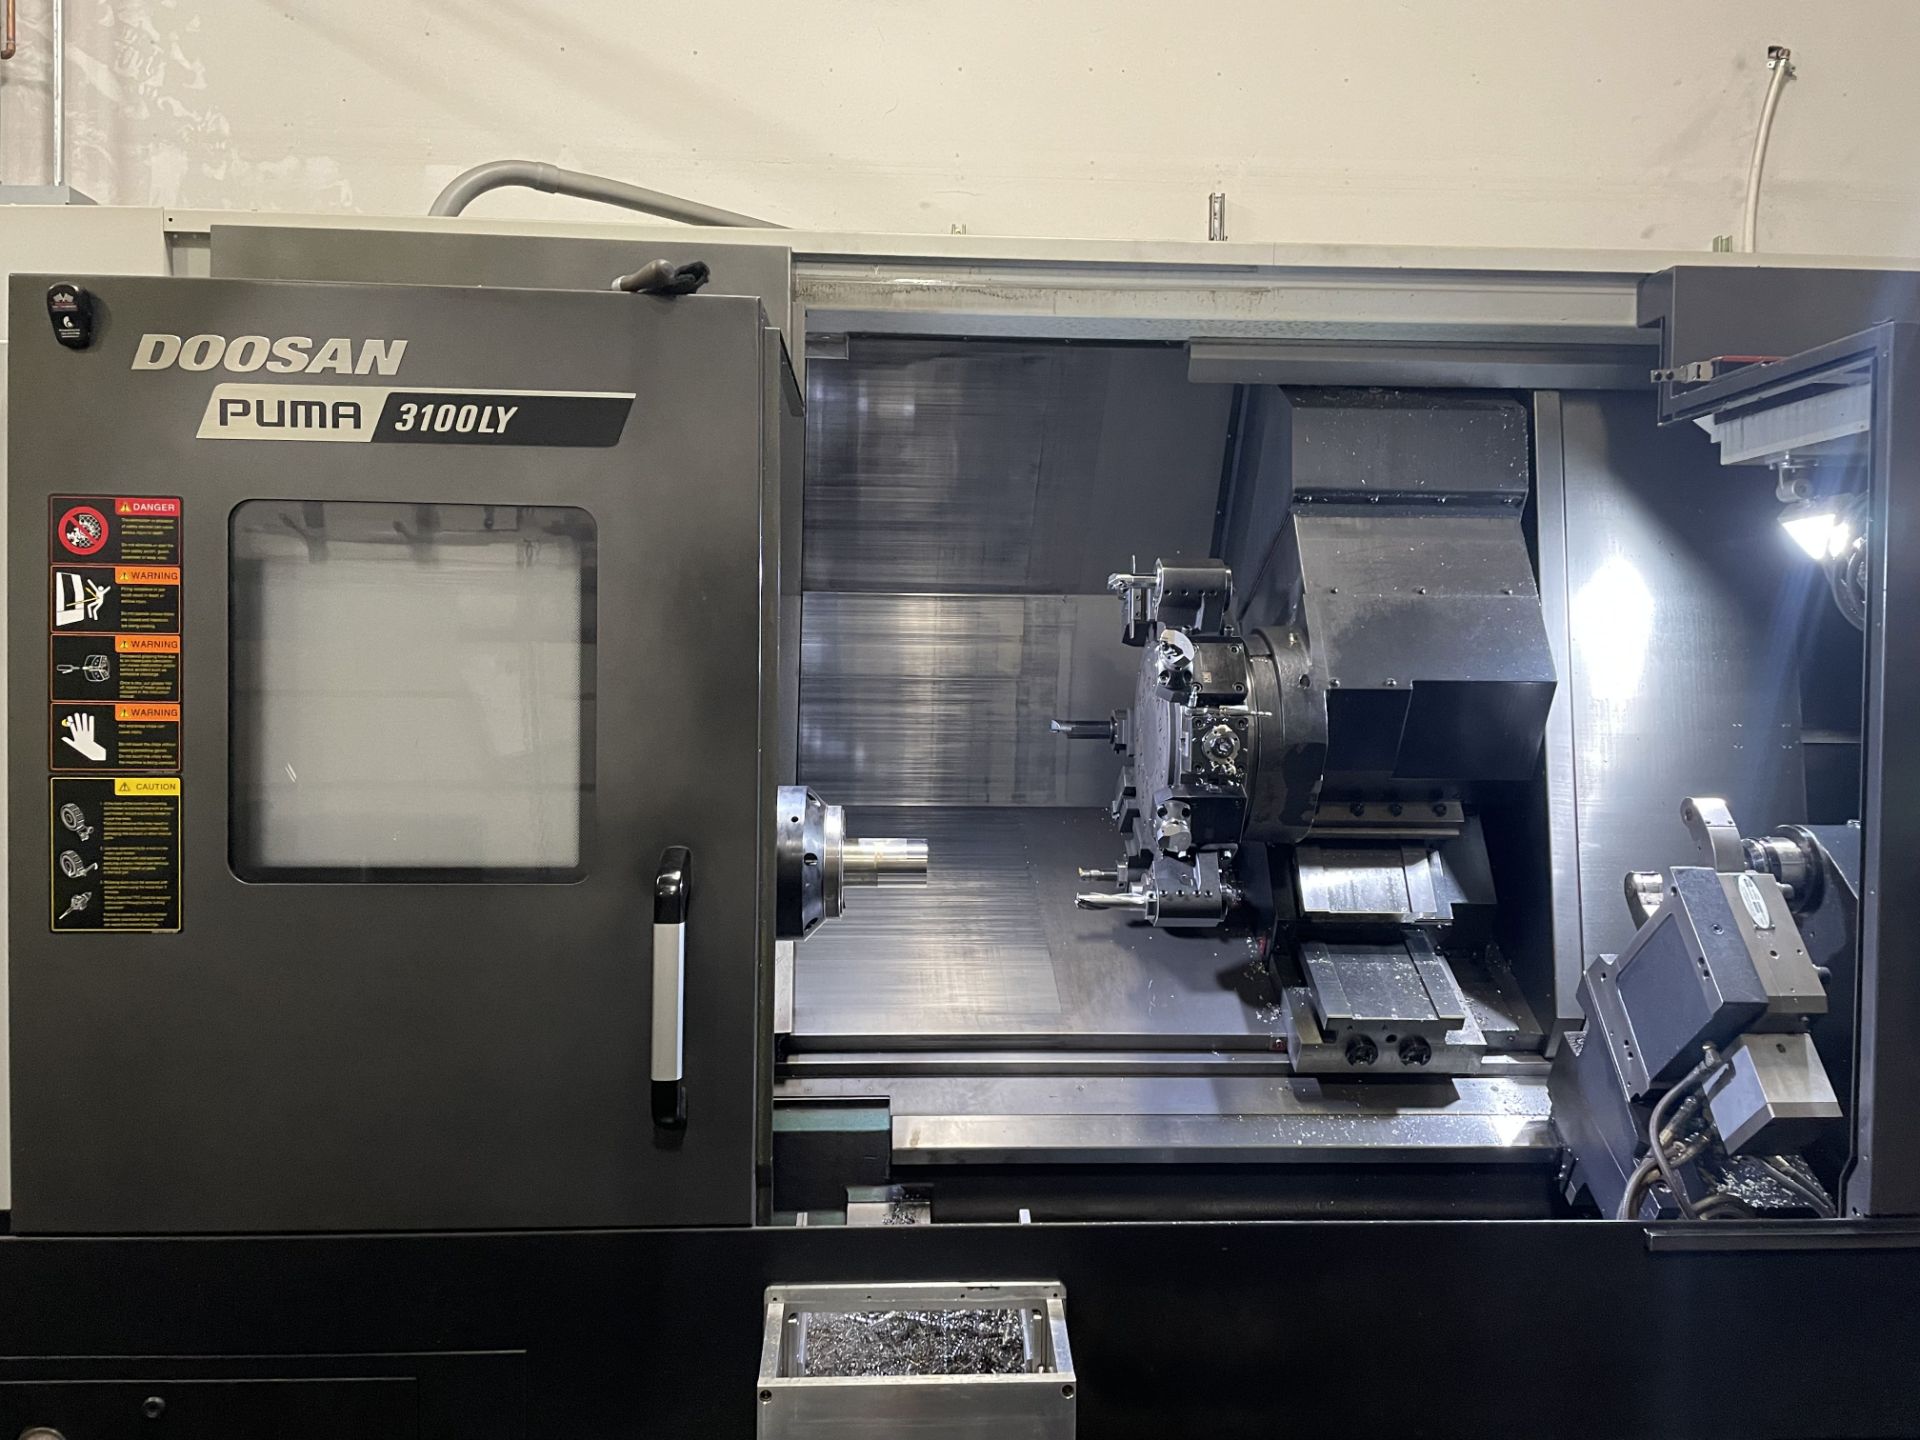 2020 Doosan Puma 3100LY, 1,256 Cut Time Hours Shown - Image 2 of 27